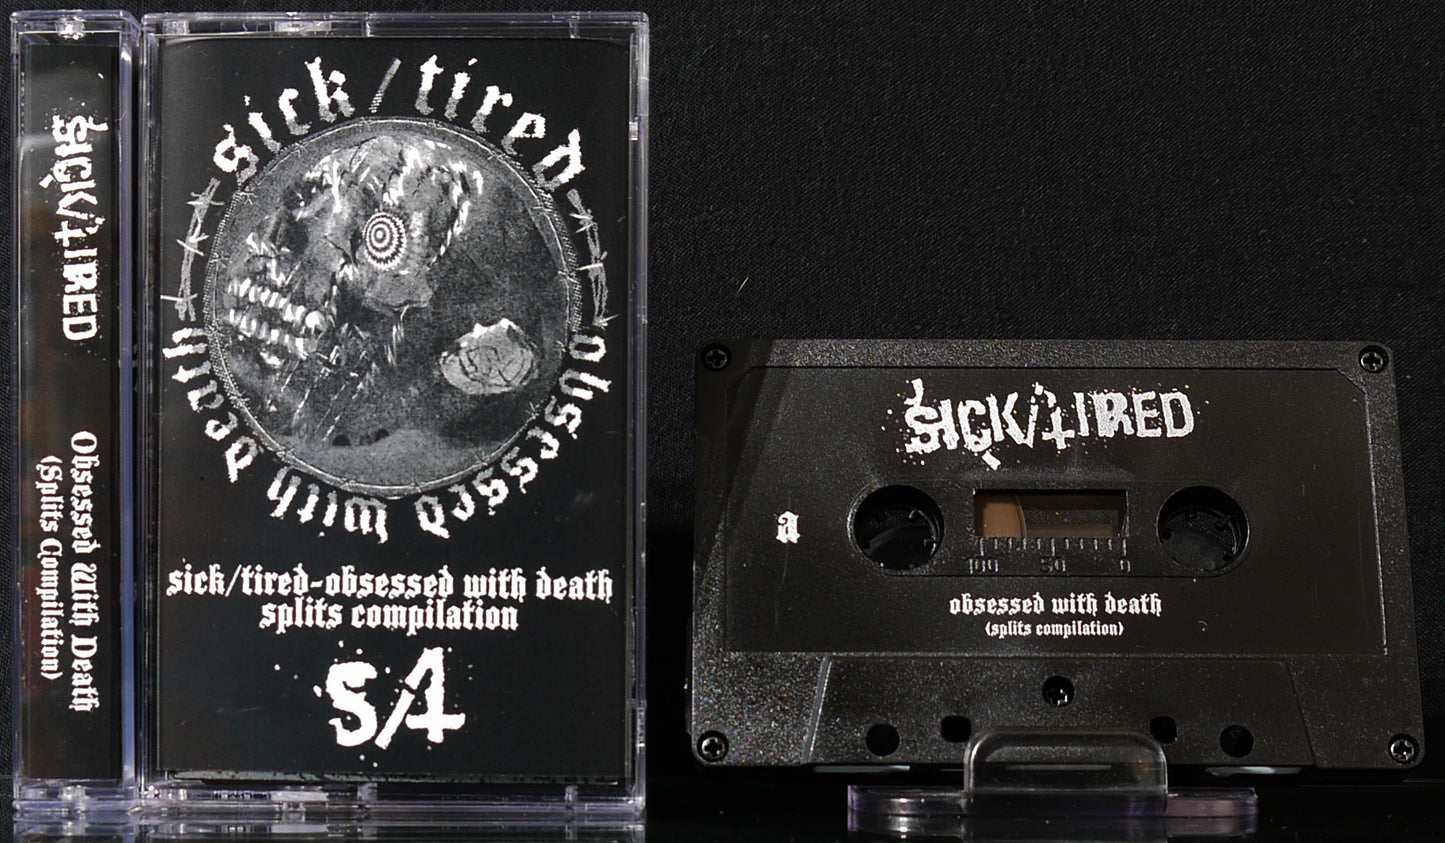 SICK/TIRED - Obsessed With Death (Splits Compilation)  Tape